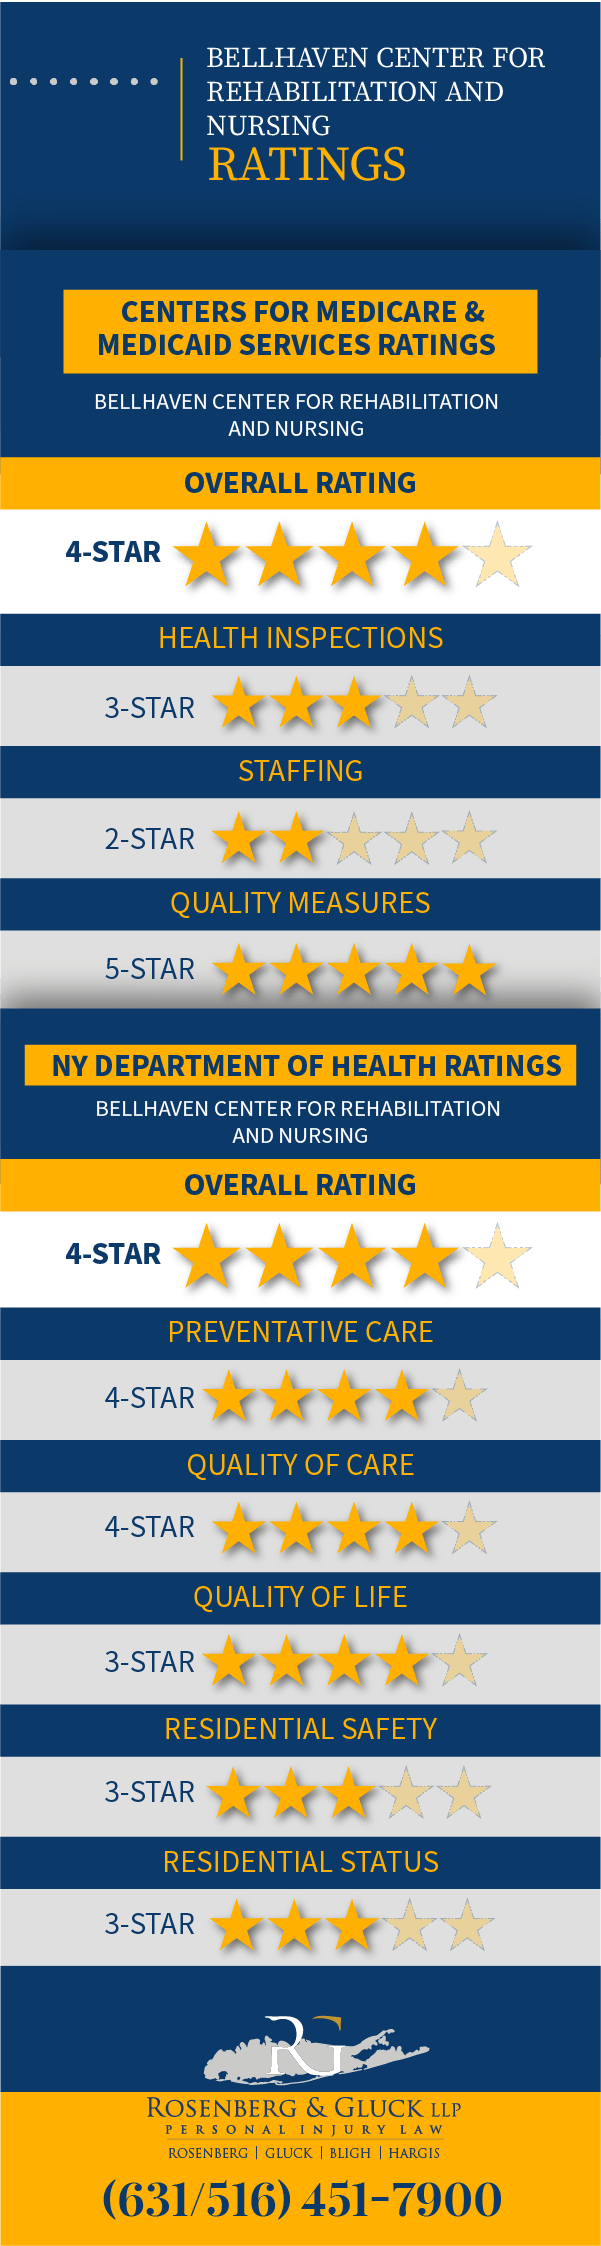 Bellhaven Center for Rehabilitation and Nursing Care Violations and Ratings Infographic